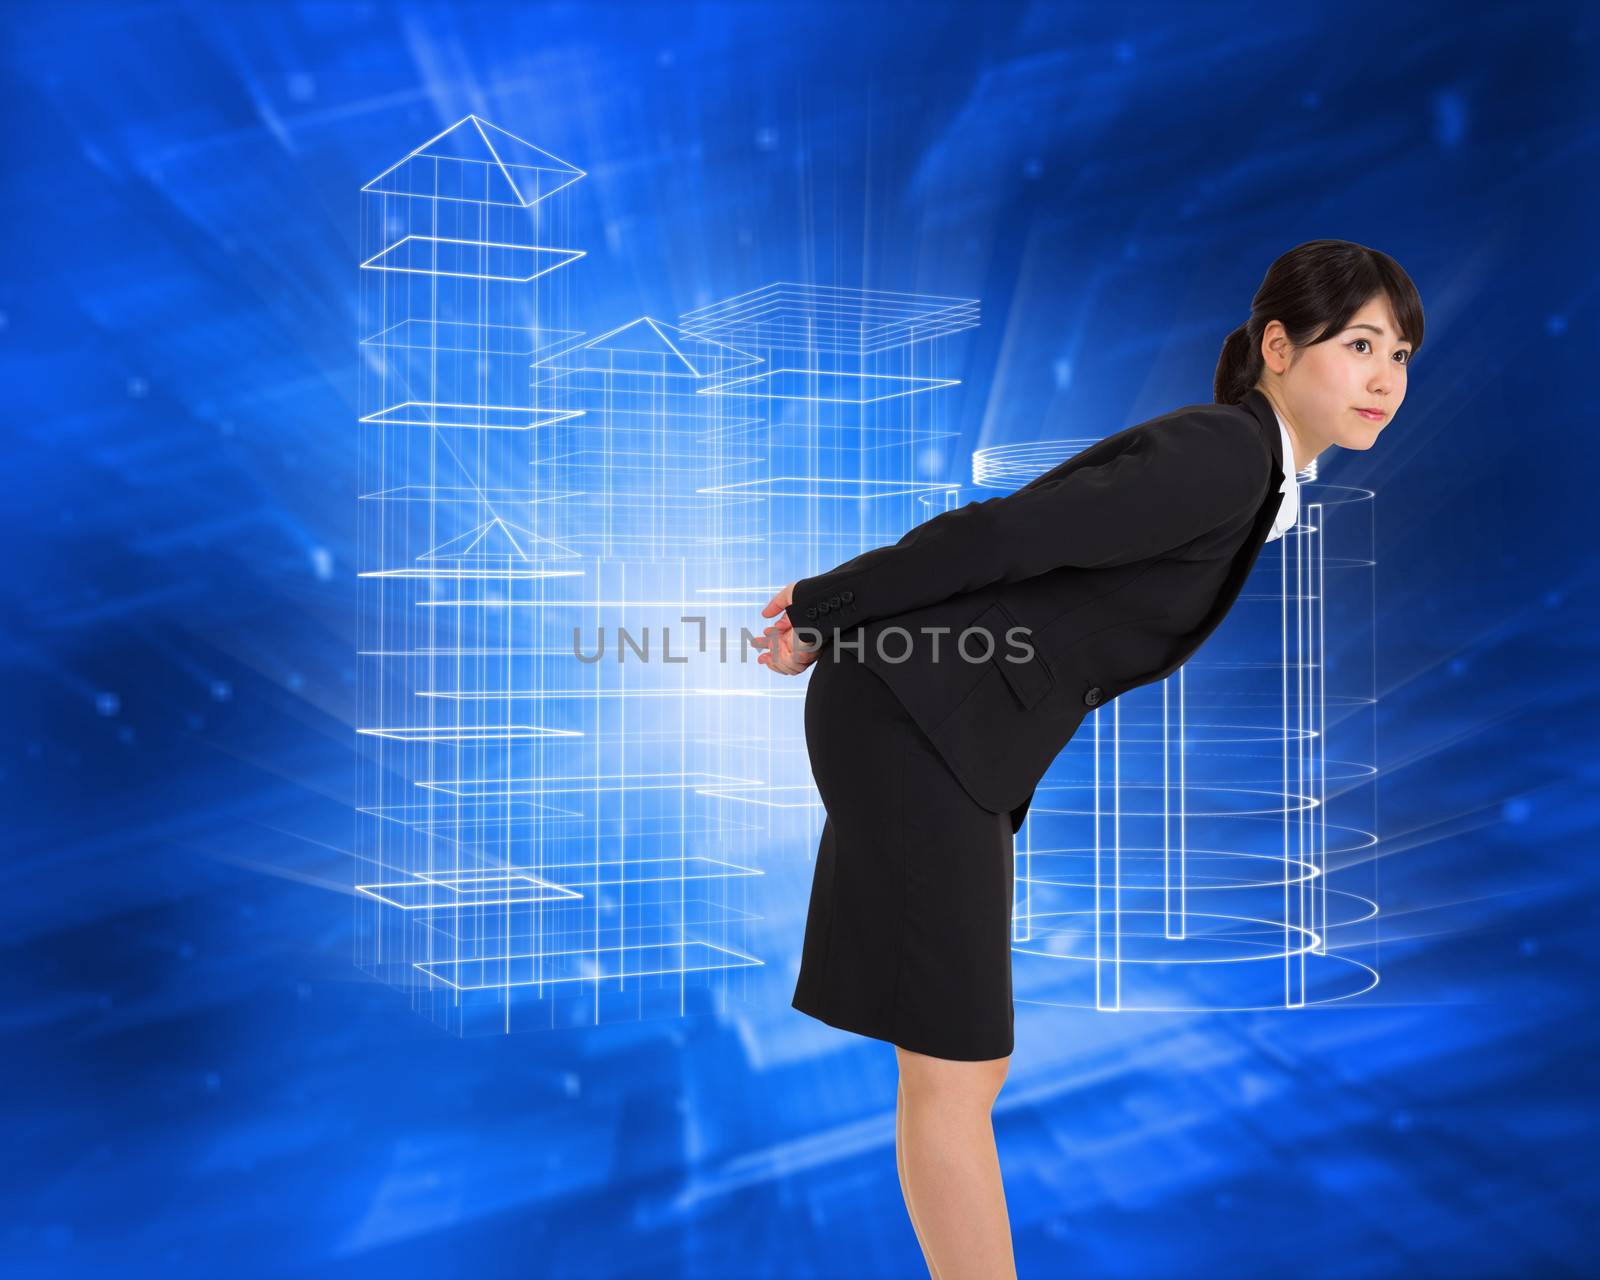 Serious businesswoman bending against abstract blue squares